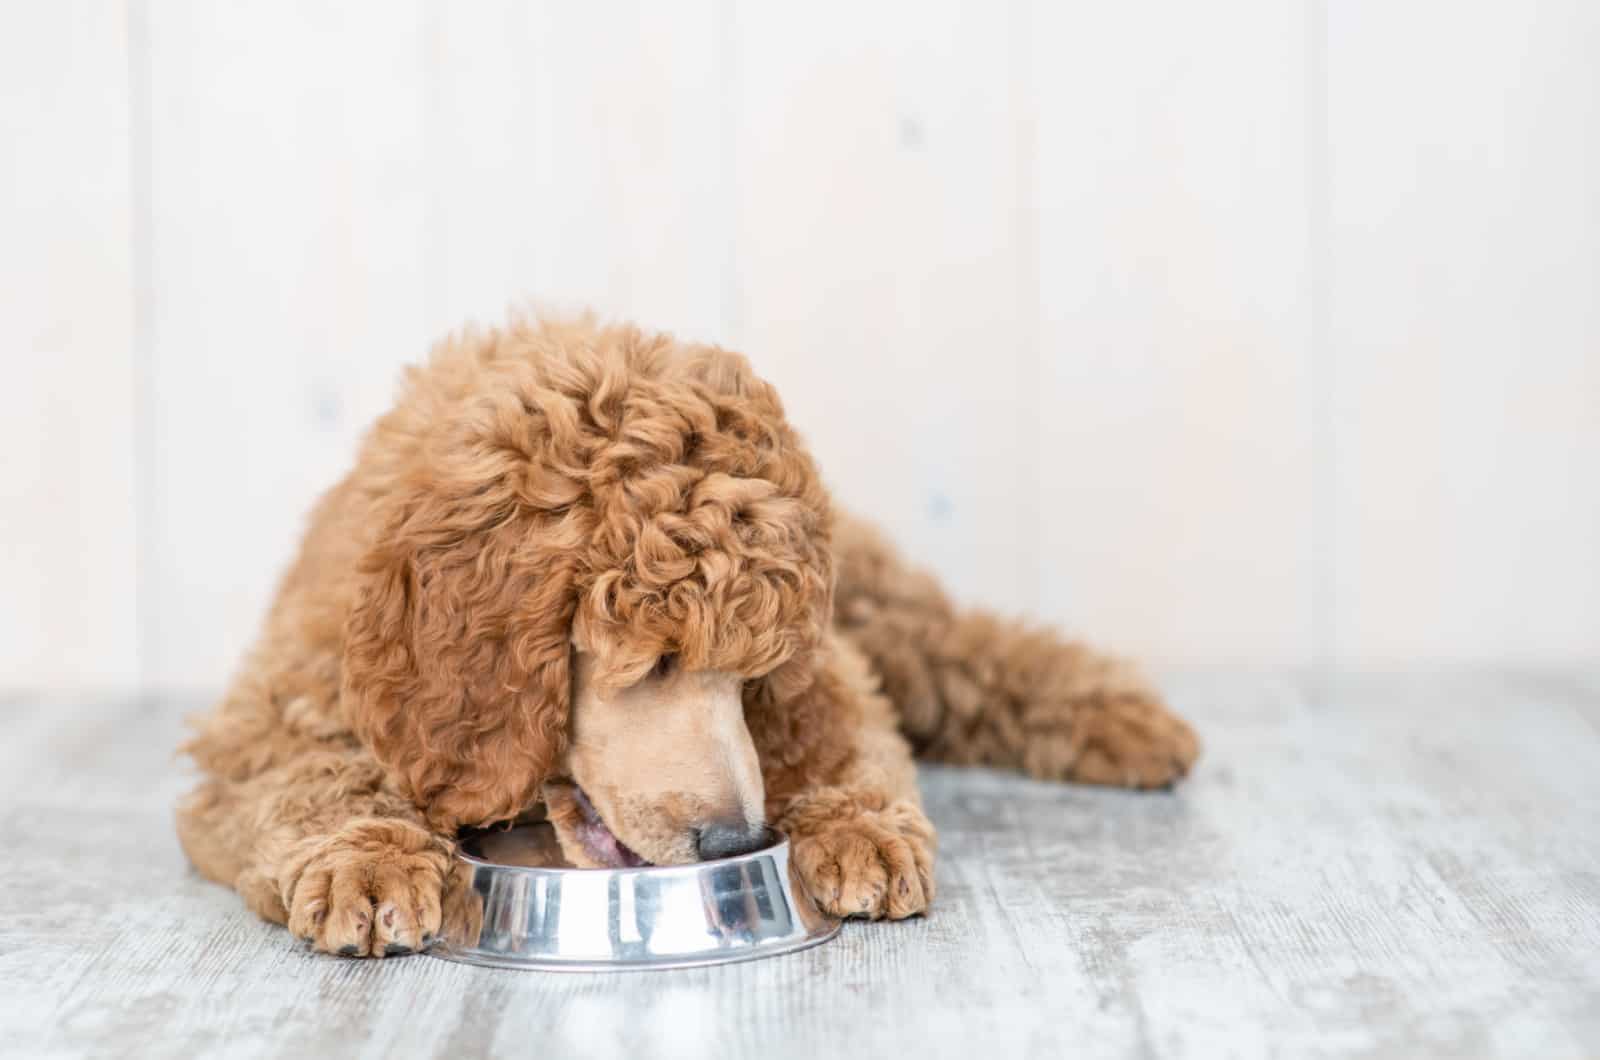 poodle eating from a bowl